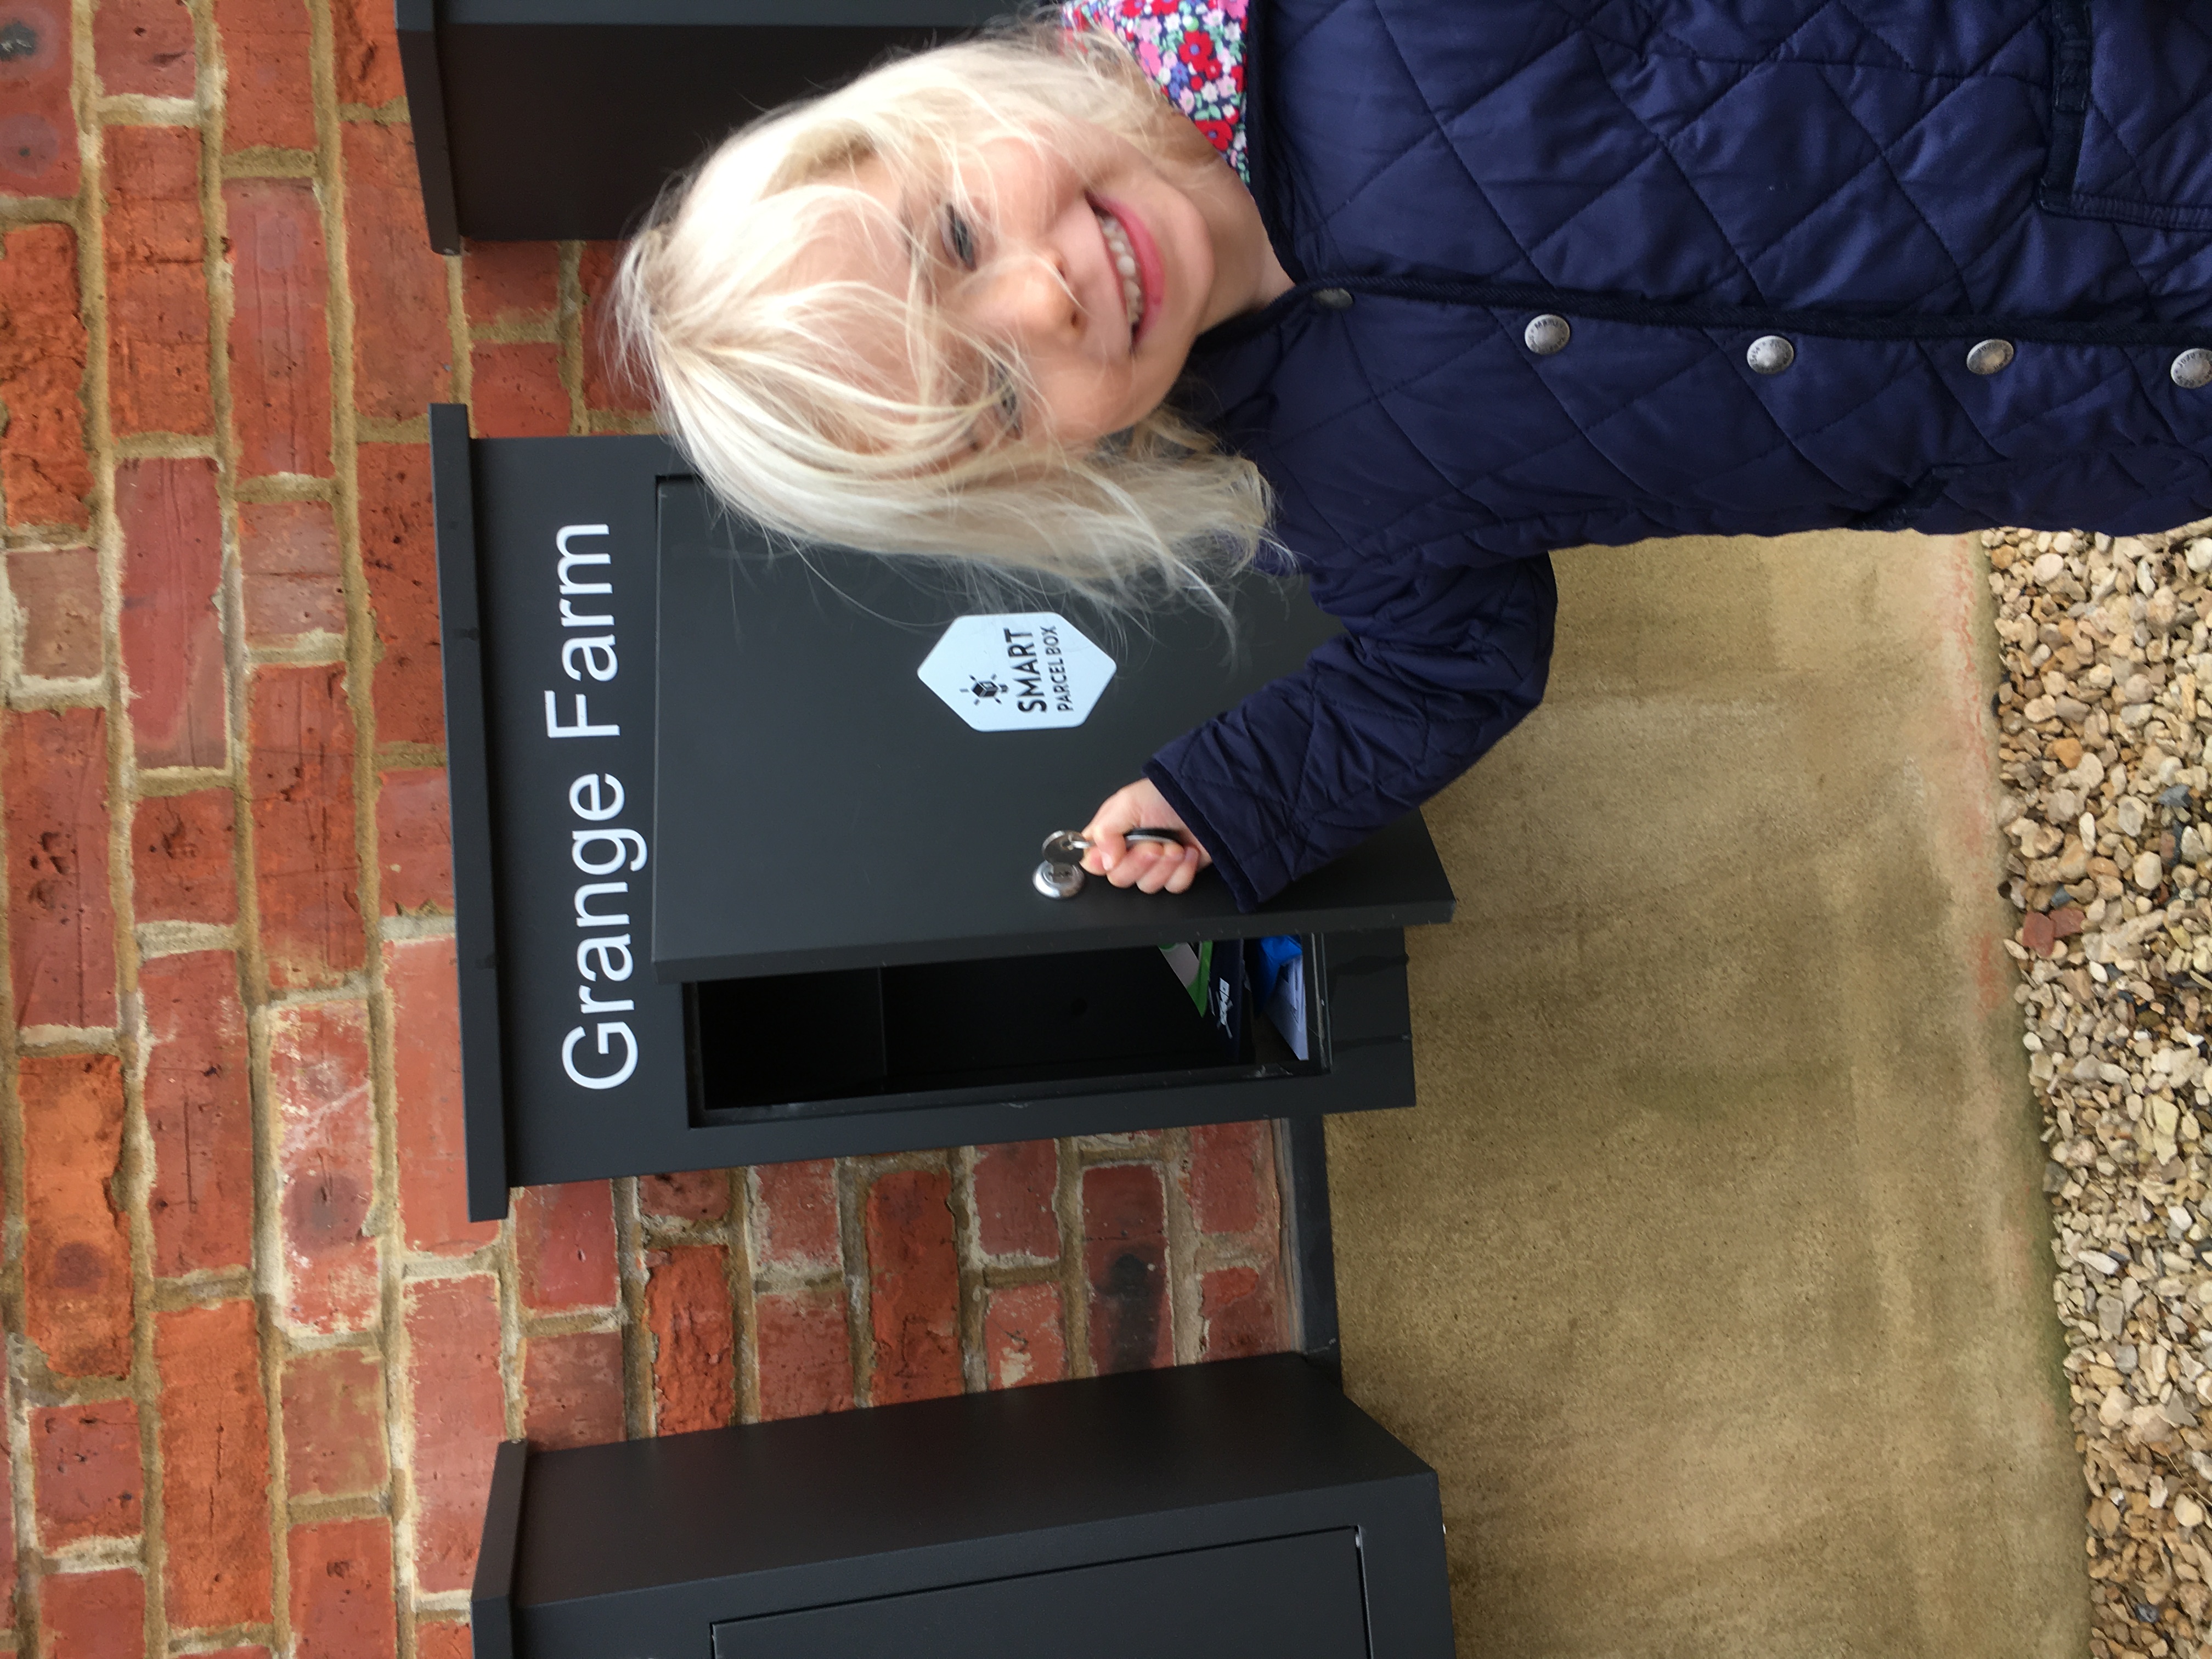 Small girl with height adjustable parcel drop box